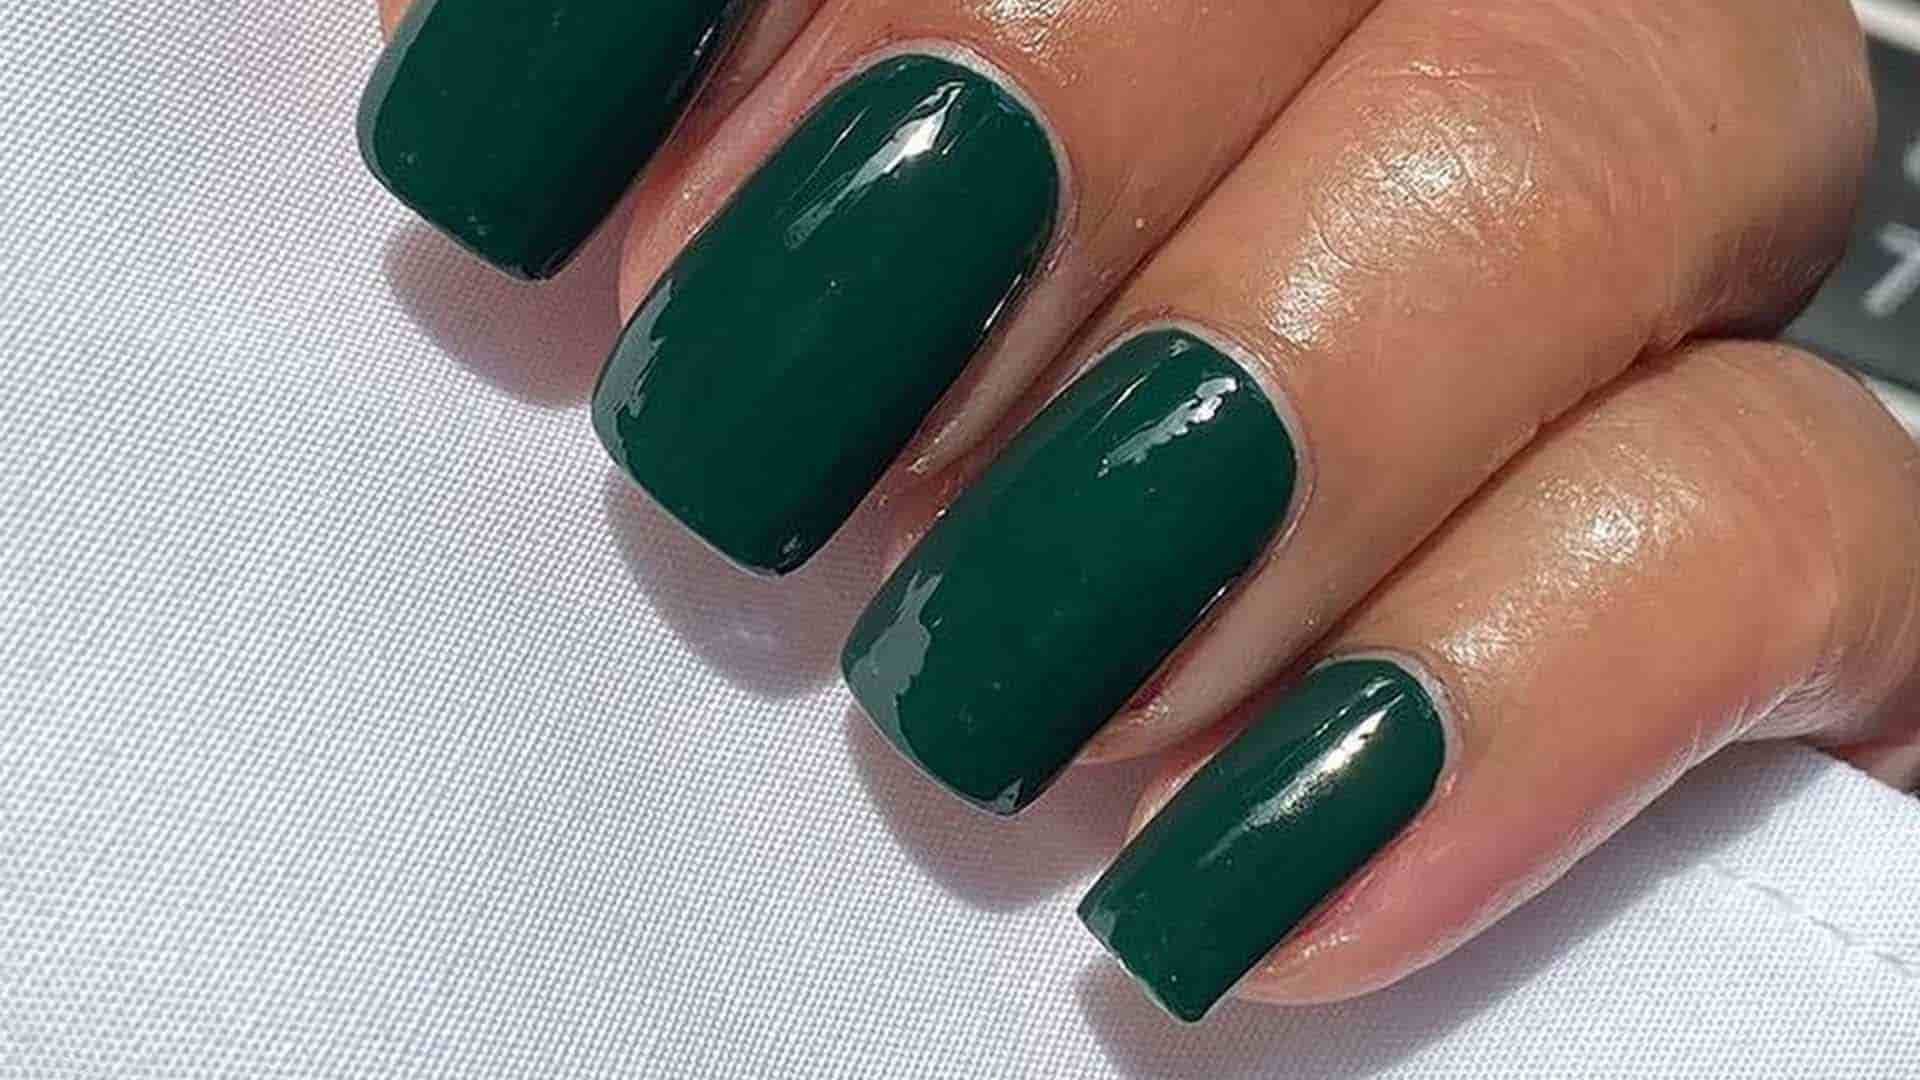 The Best Dark Nail Polish Colors For 2021